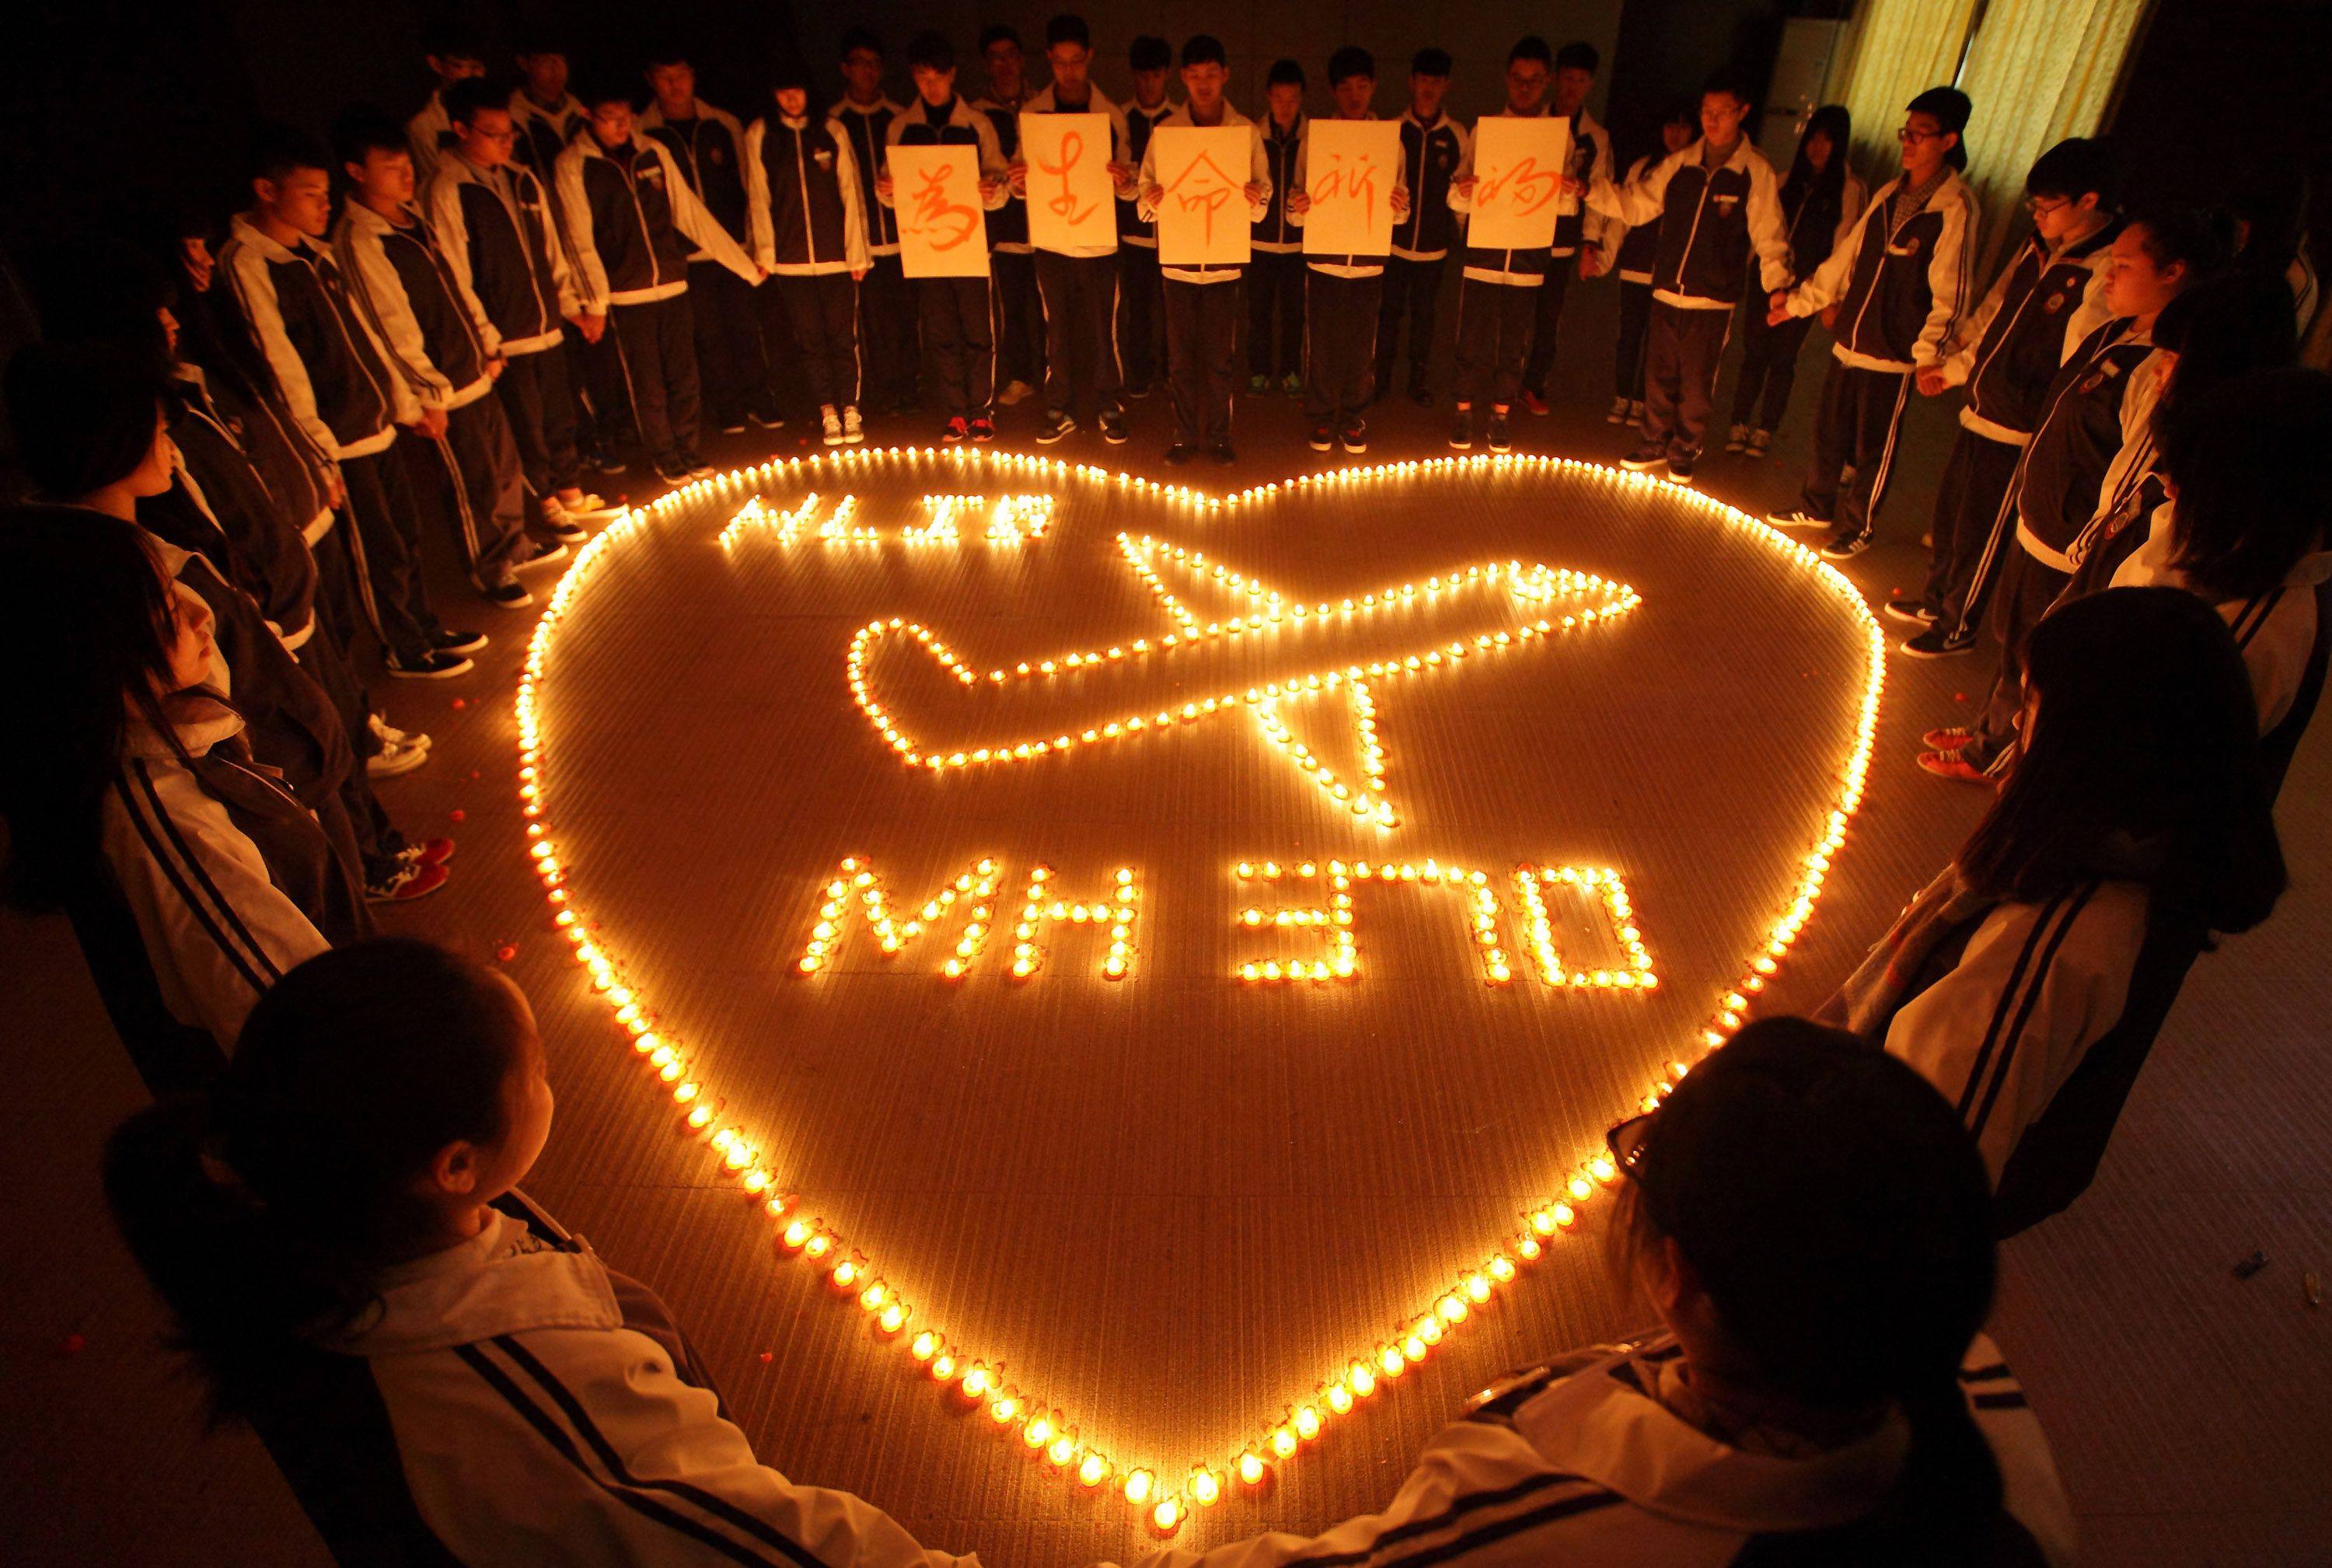 Students light candles to pray for the passengers on the missing Malaysia Airlines flight MH370 in Zhuji, China’s Zhejiang province. Photo: AFP